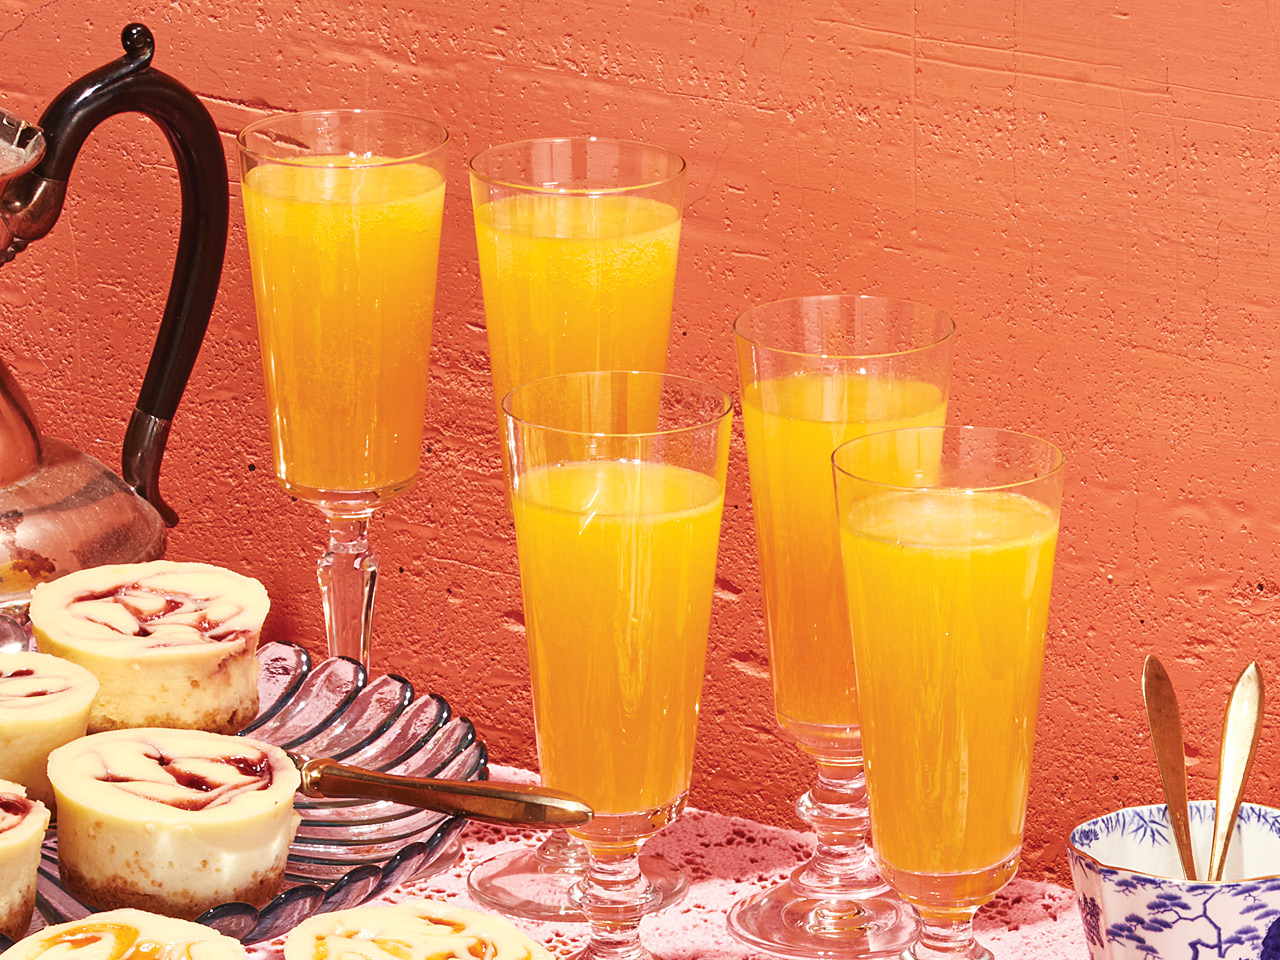 Five glasses of hard cider mimosa served on a table alongside a pitcher and bruch pastries